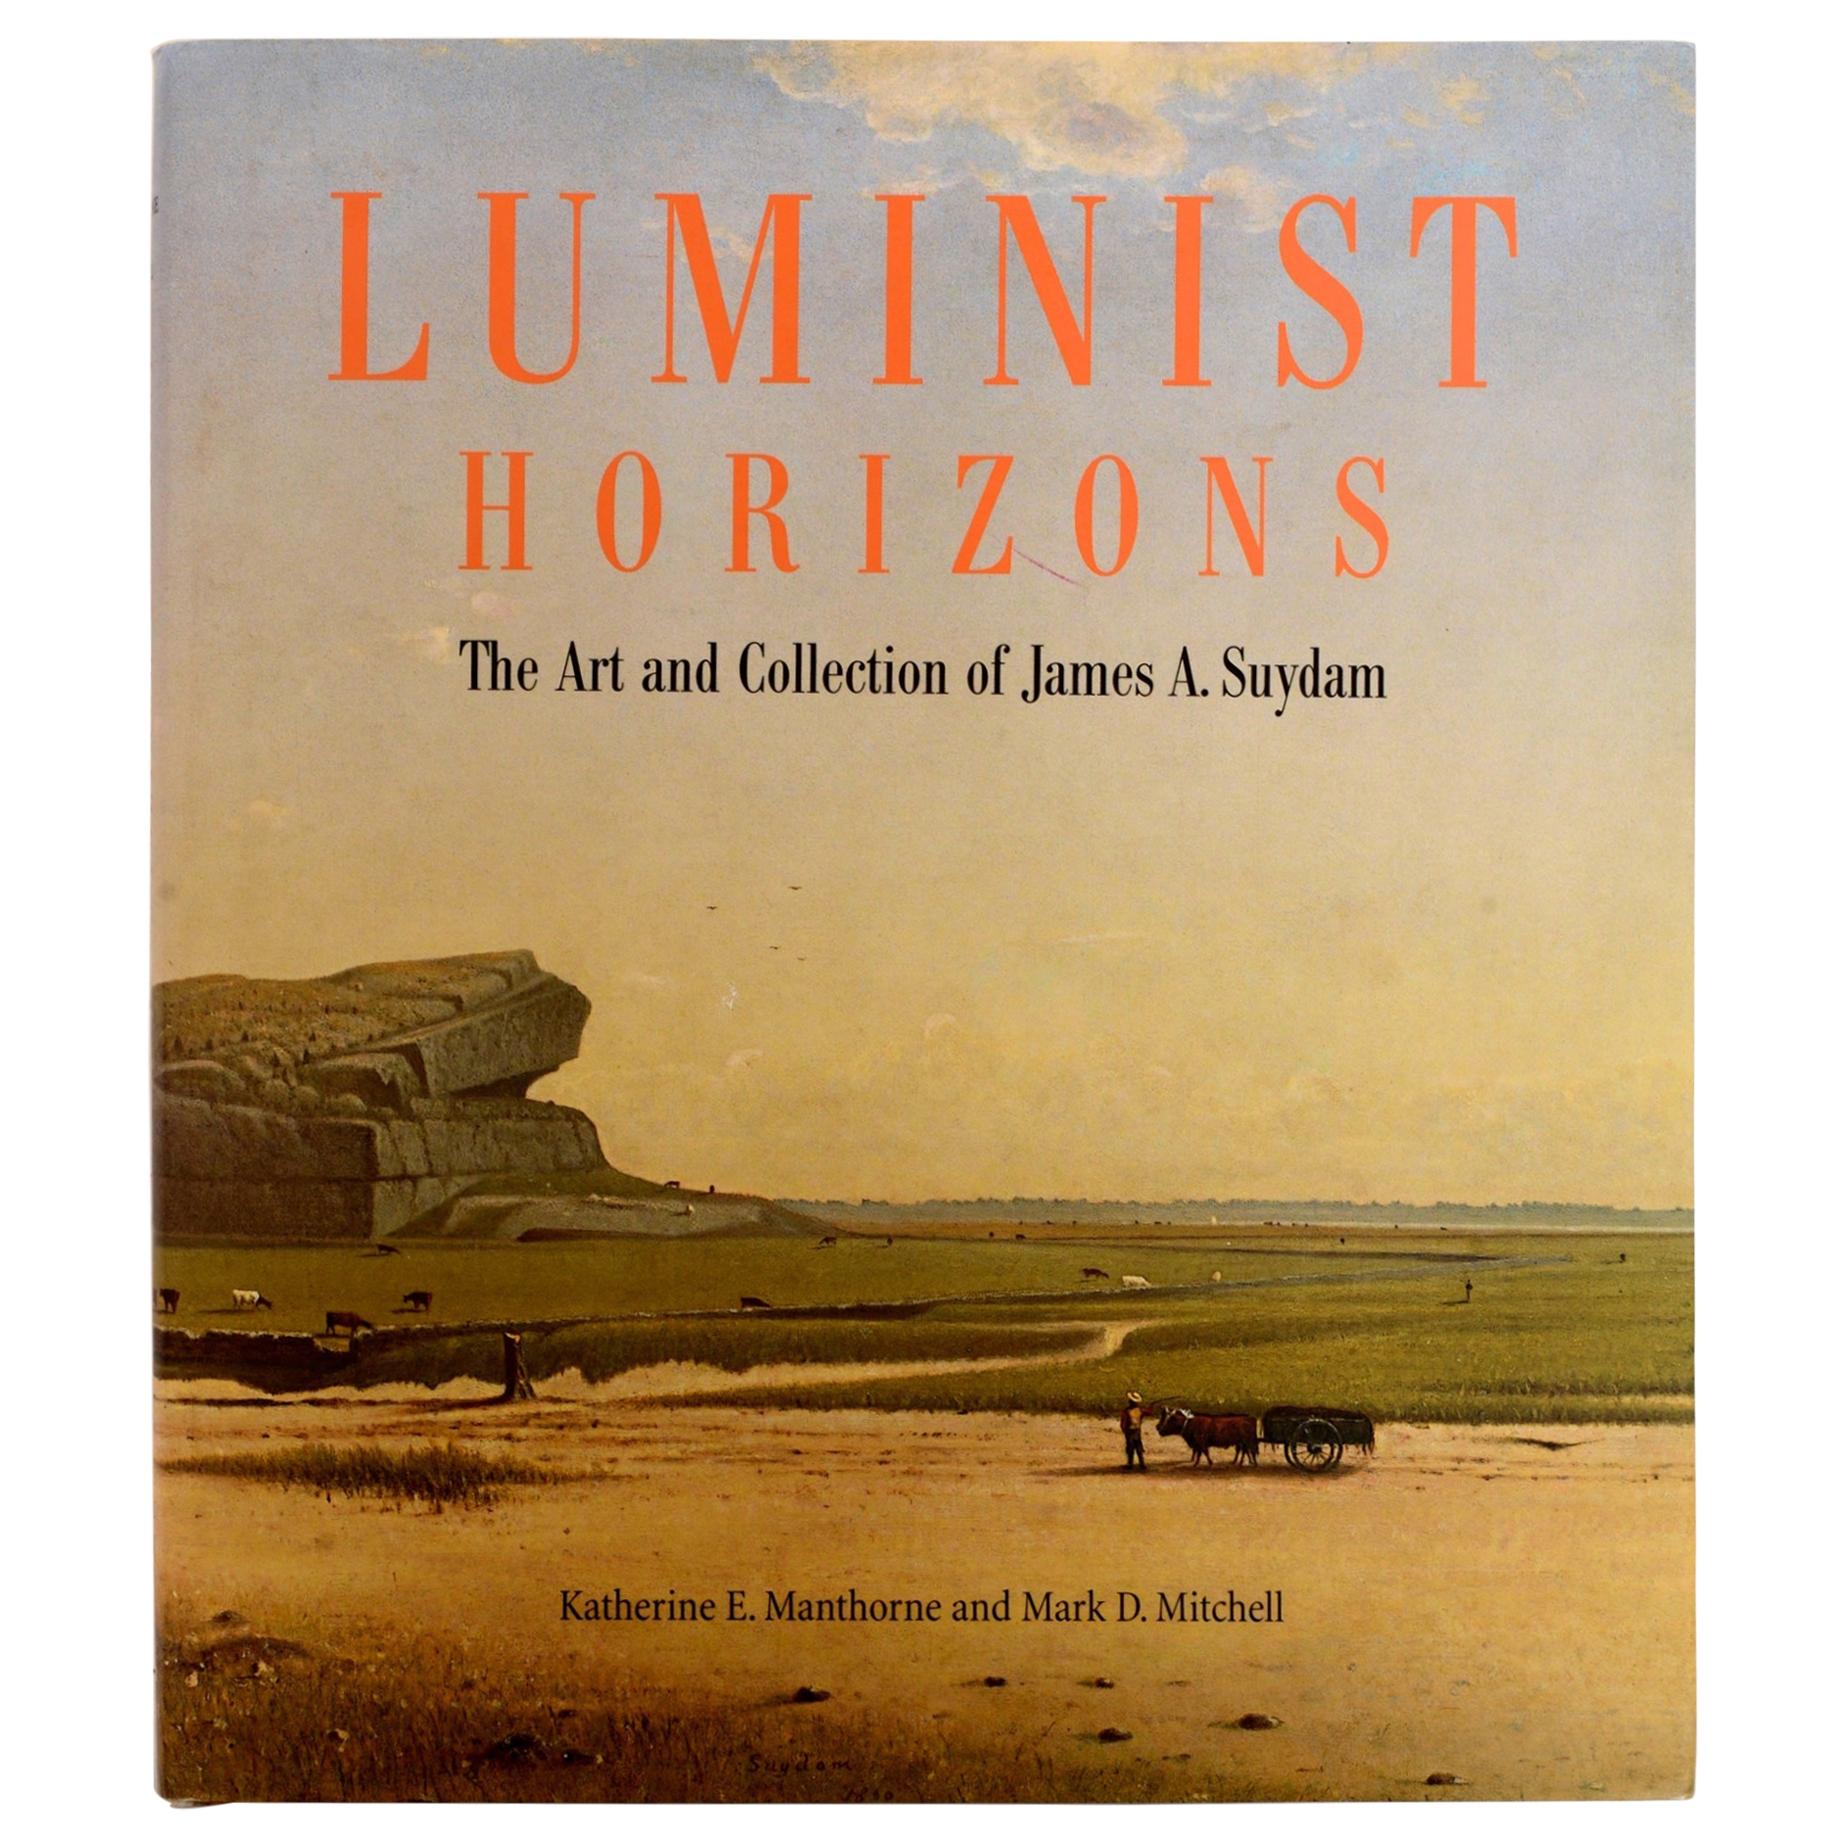 Luminist Horizons The Art and Collection of James A. Suydam Stated First Edition